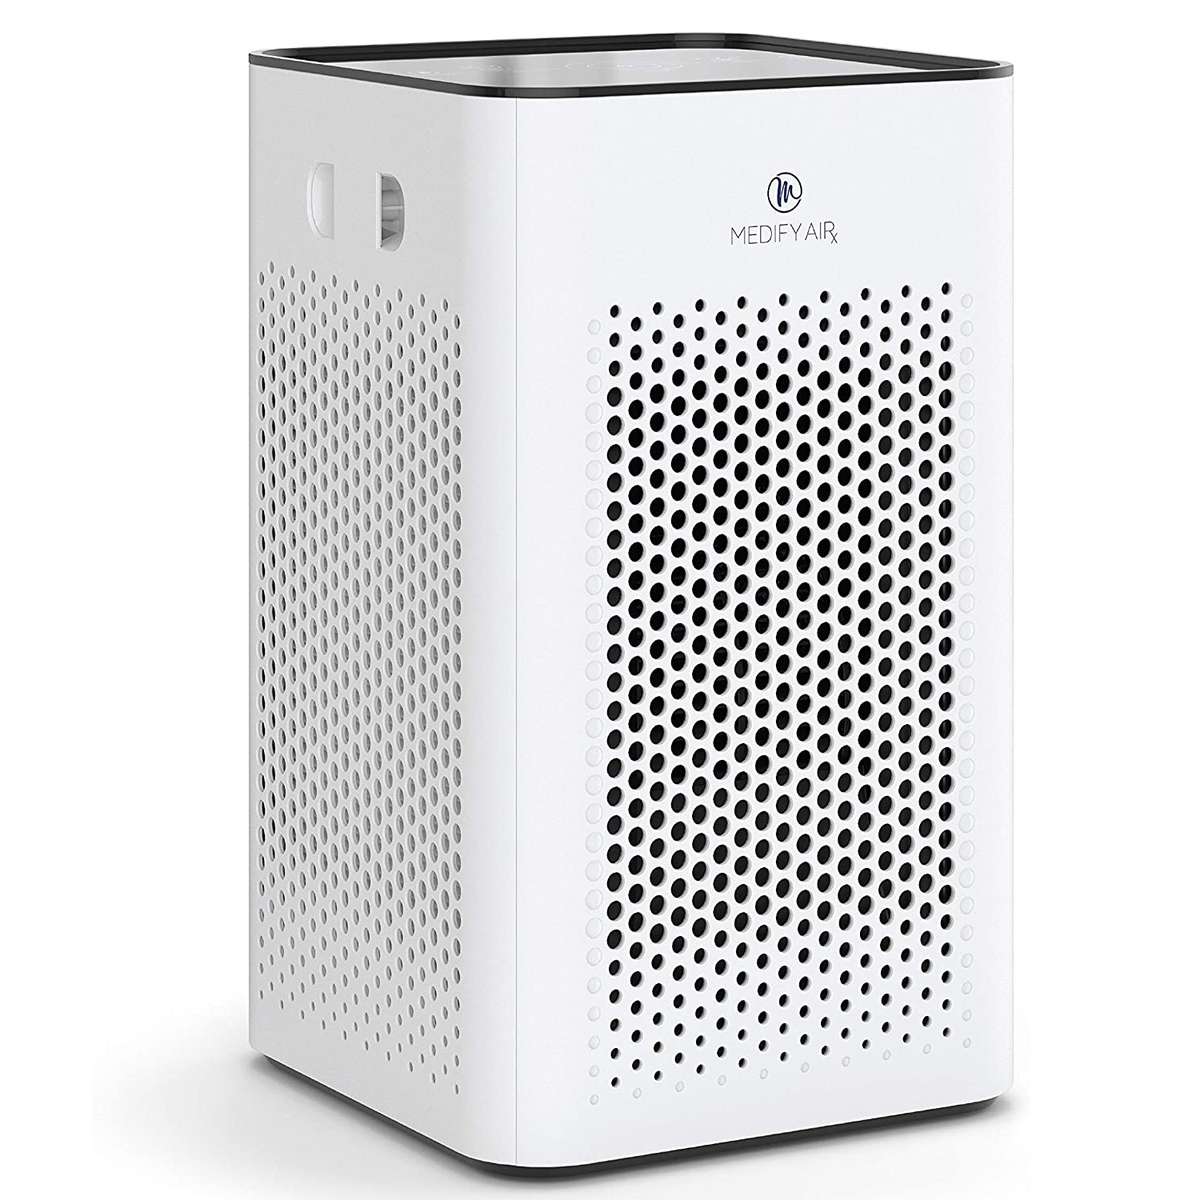 Amazon Prime Day air purifiers